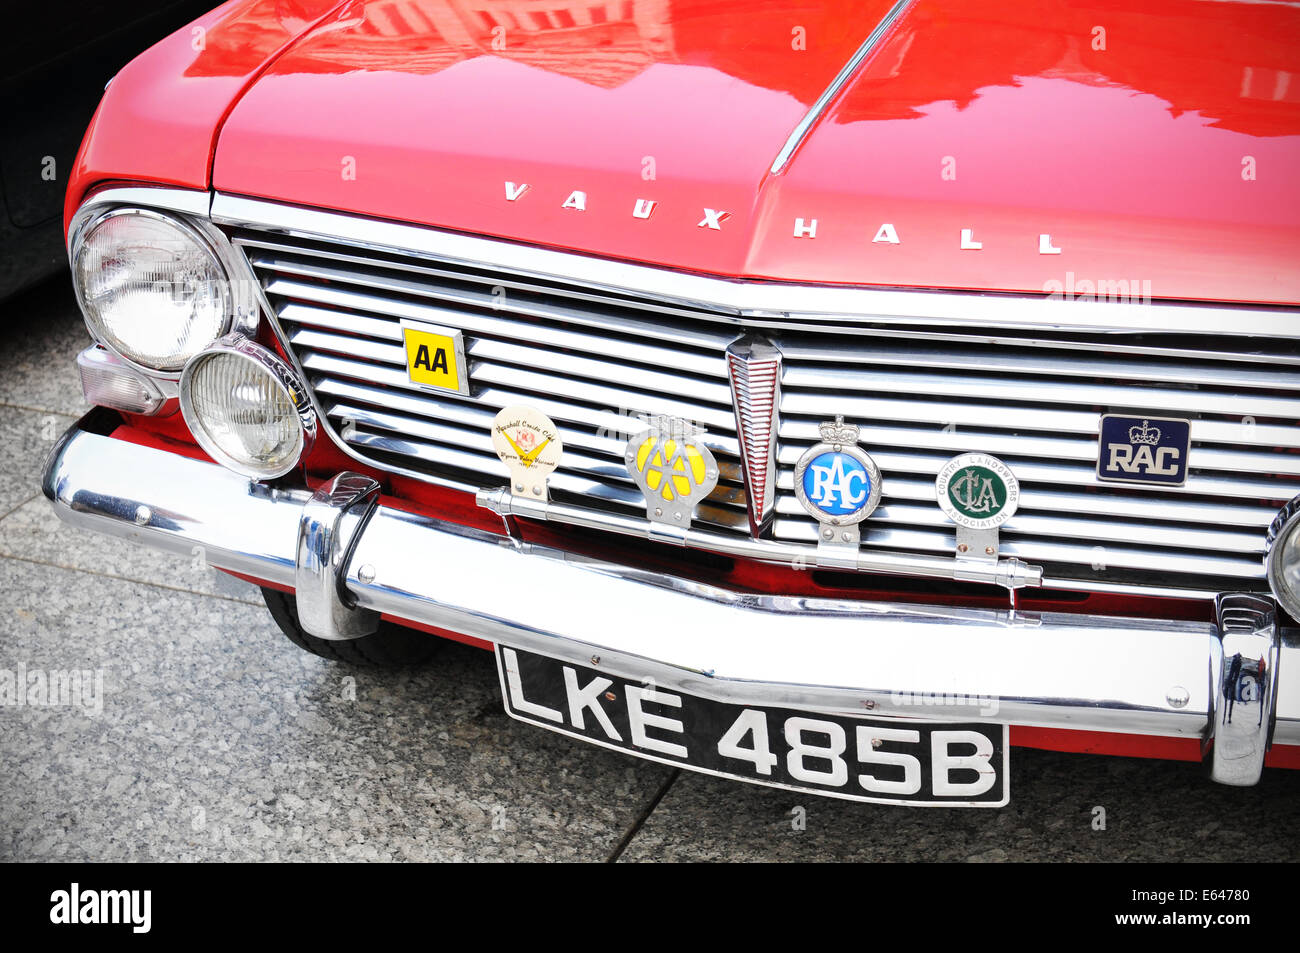 NOTTINGHAM, UK - APRIL 29, 2011: Frontal detail of a retro Vauxhall Cresta car. Picture taken during the vintage cars festival Stock Photo